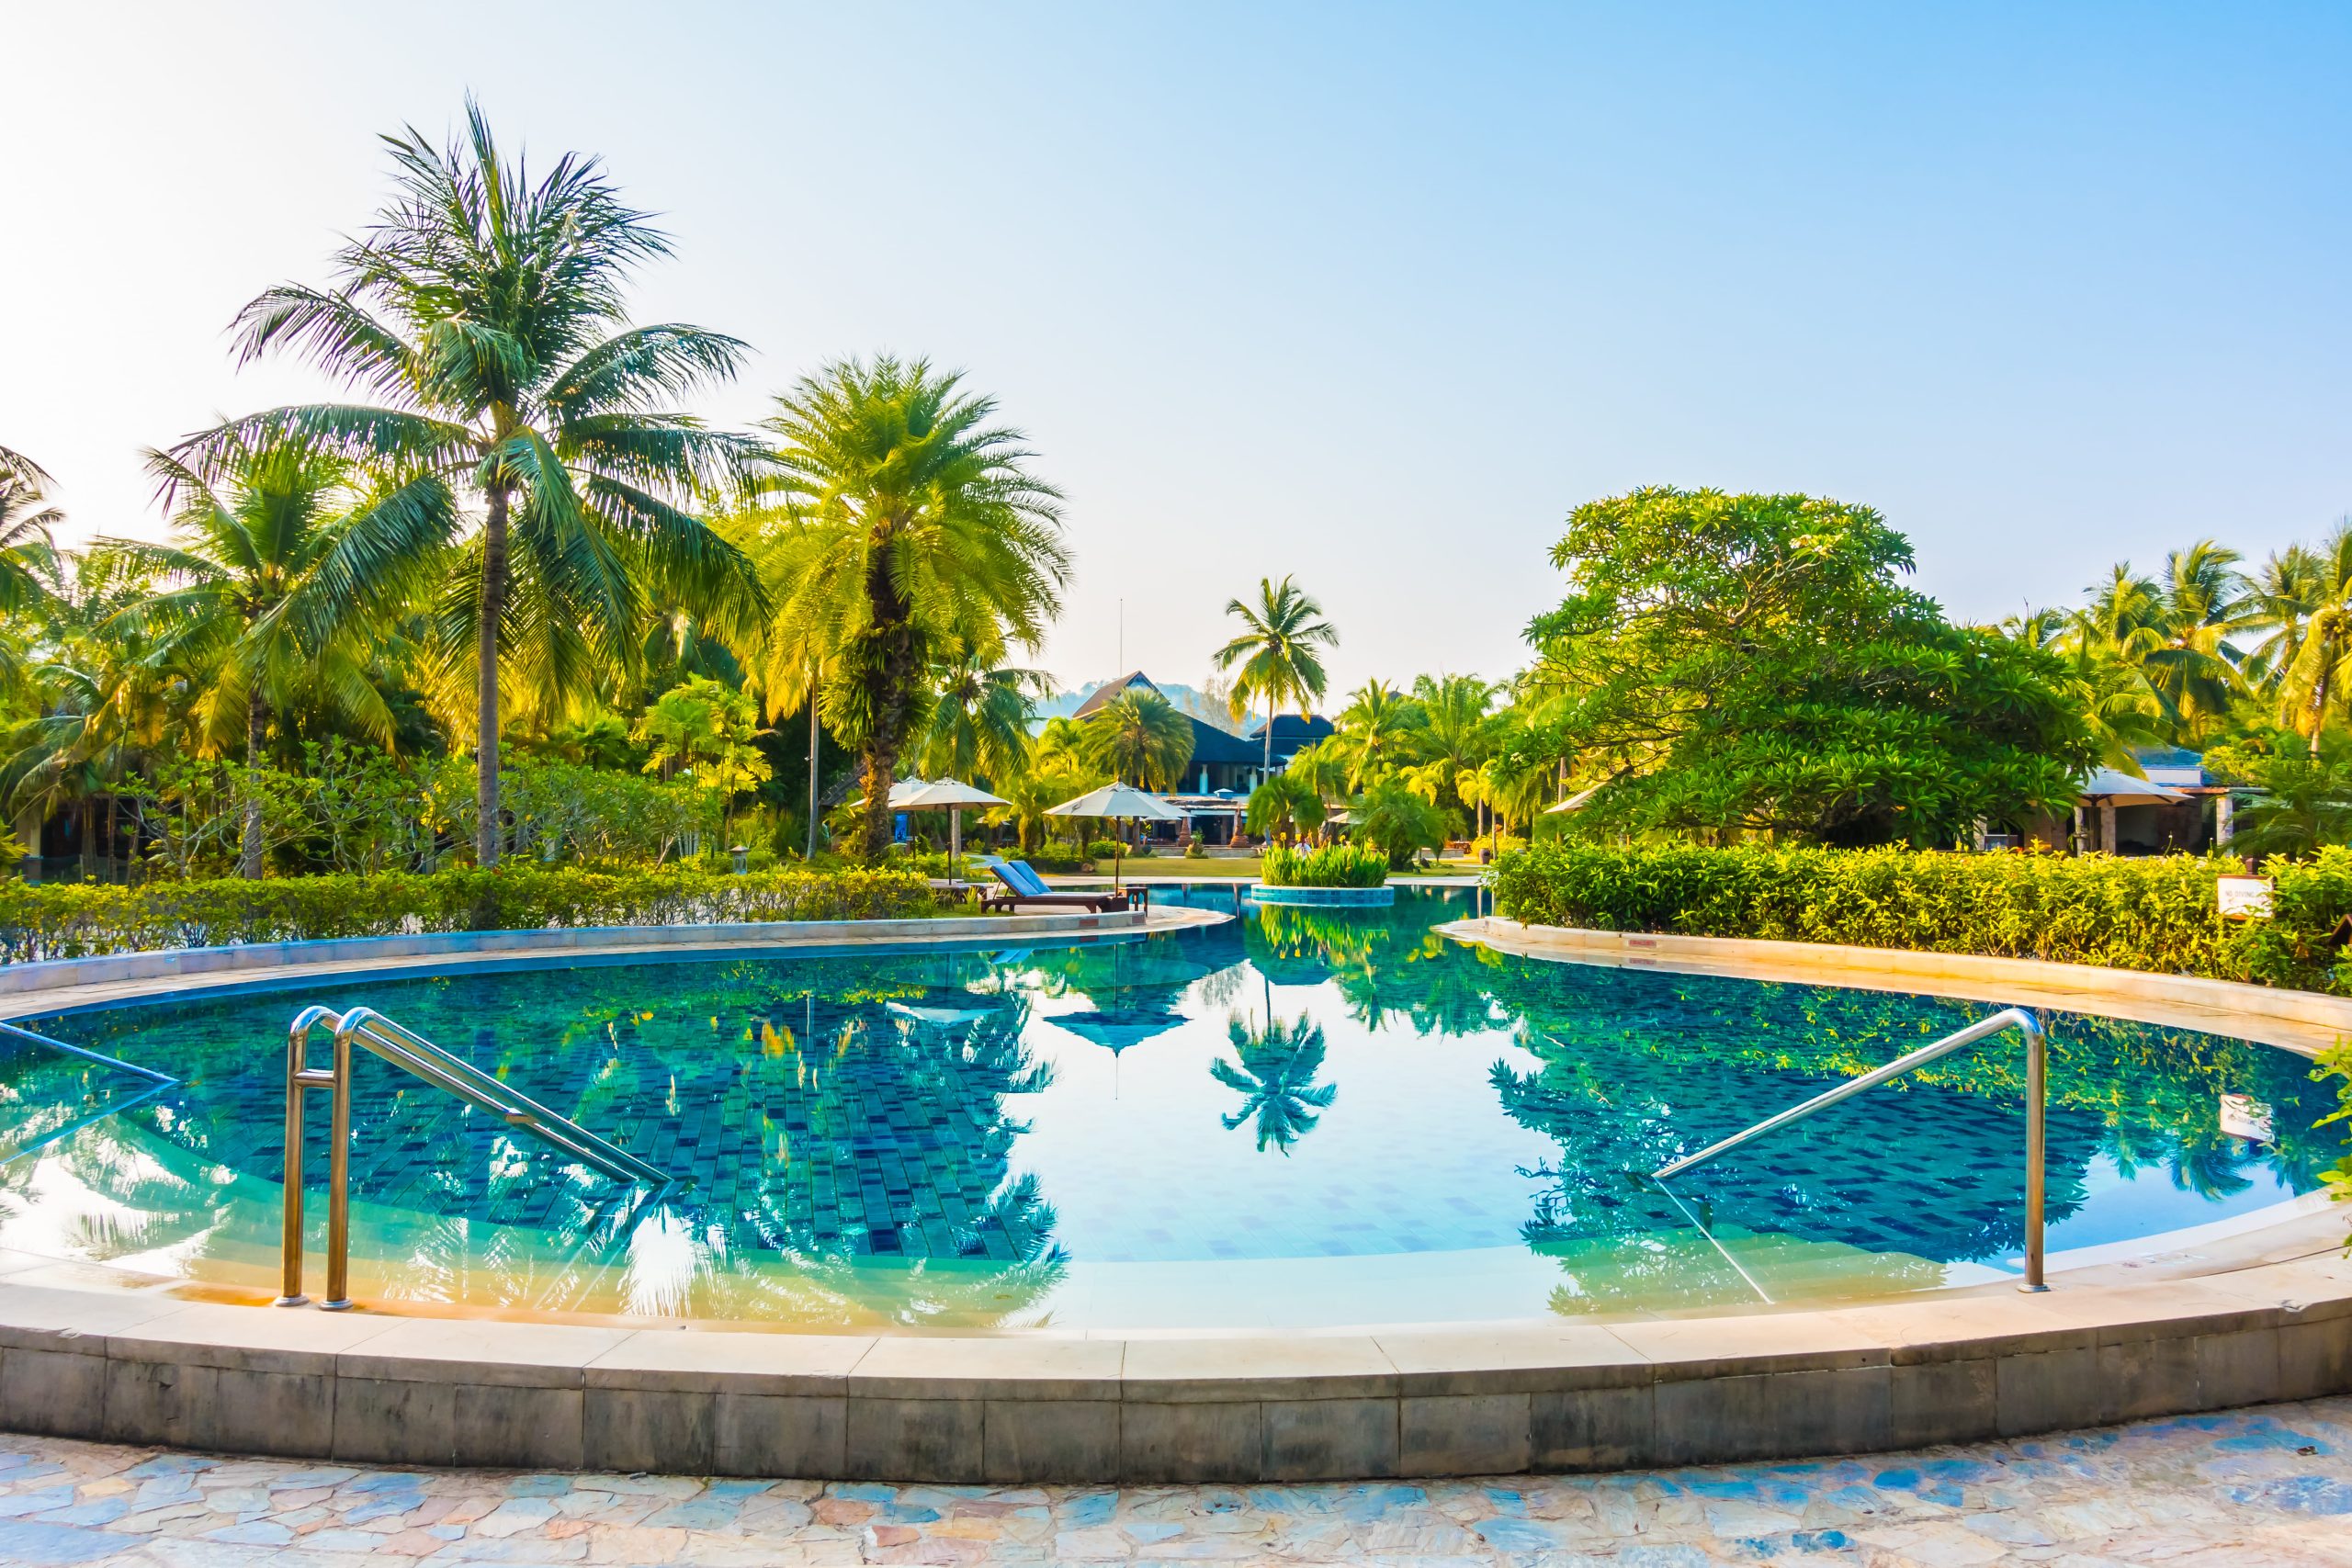 LANDSCAPING & SWIMMING POOLS